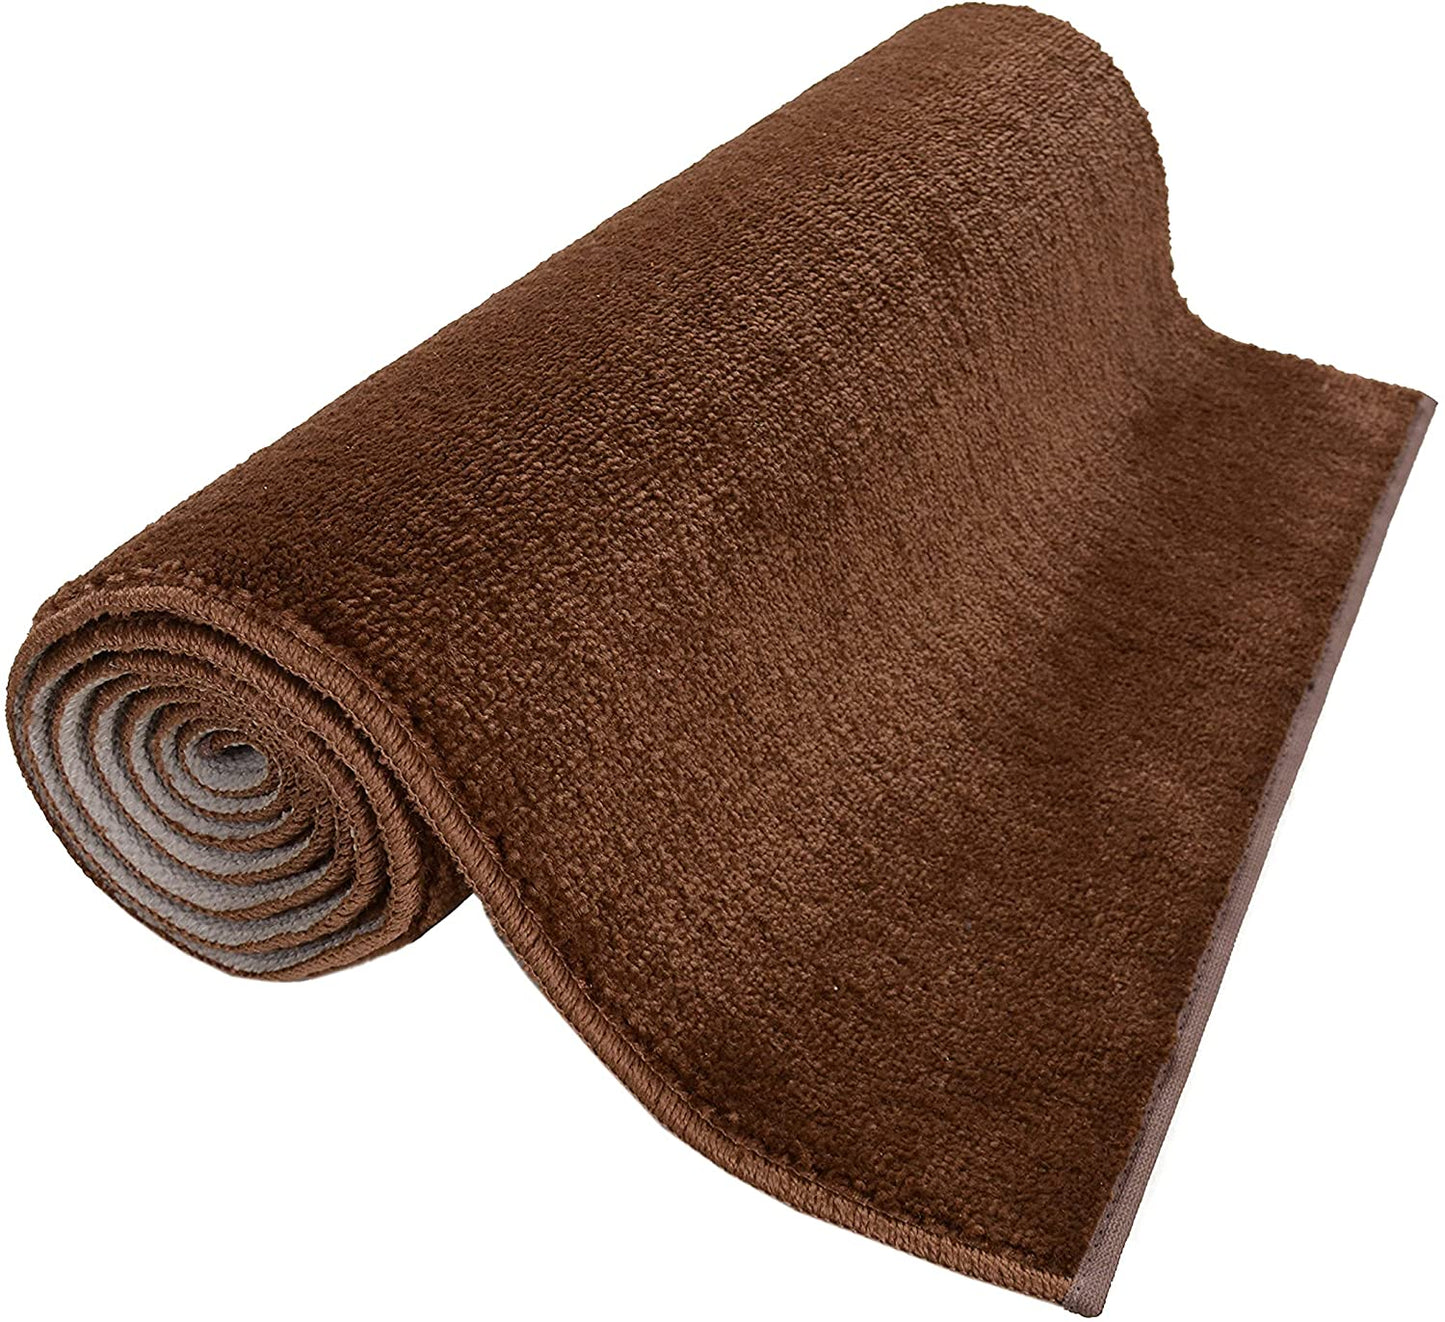 Machine Washable Custom Size Runner Rug Copper Brown Color Skid Resistant Rug Runner Customize Up to 50 Feet and 30 Inch Width Runner Rug